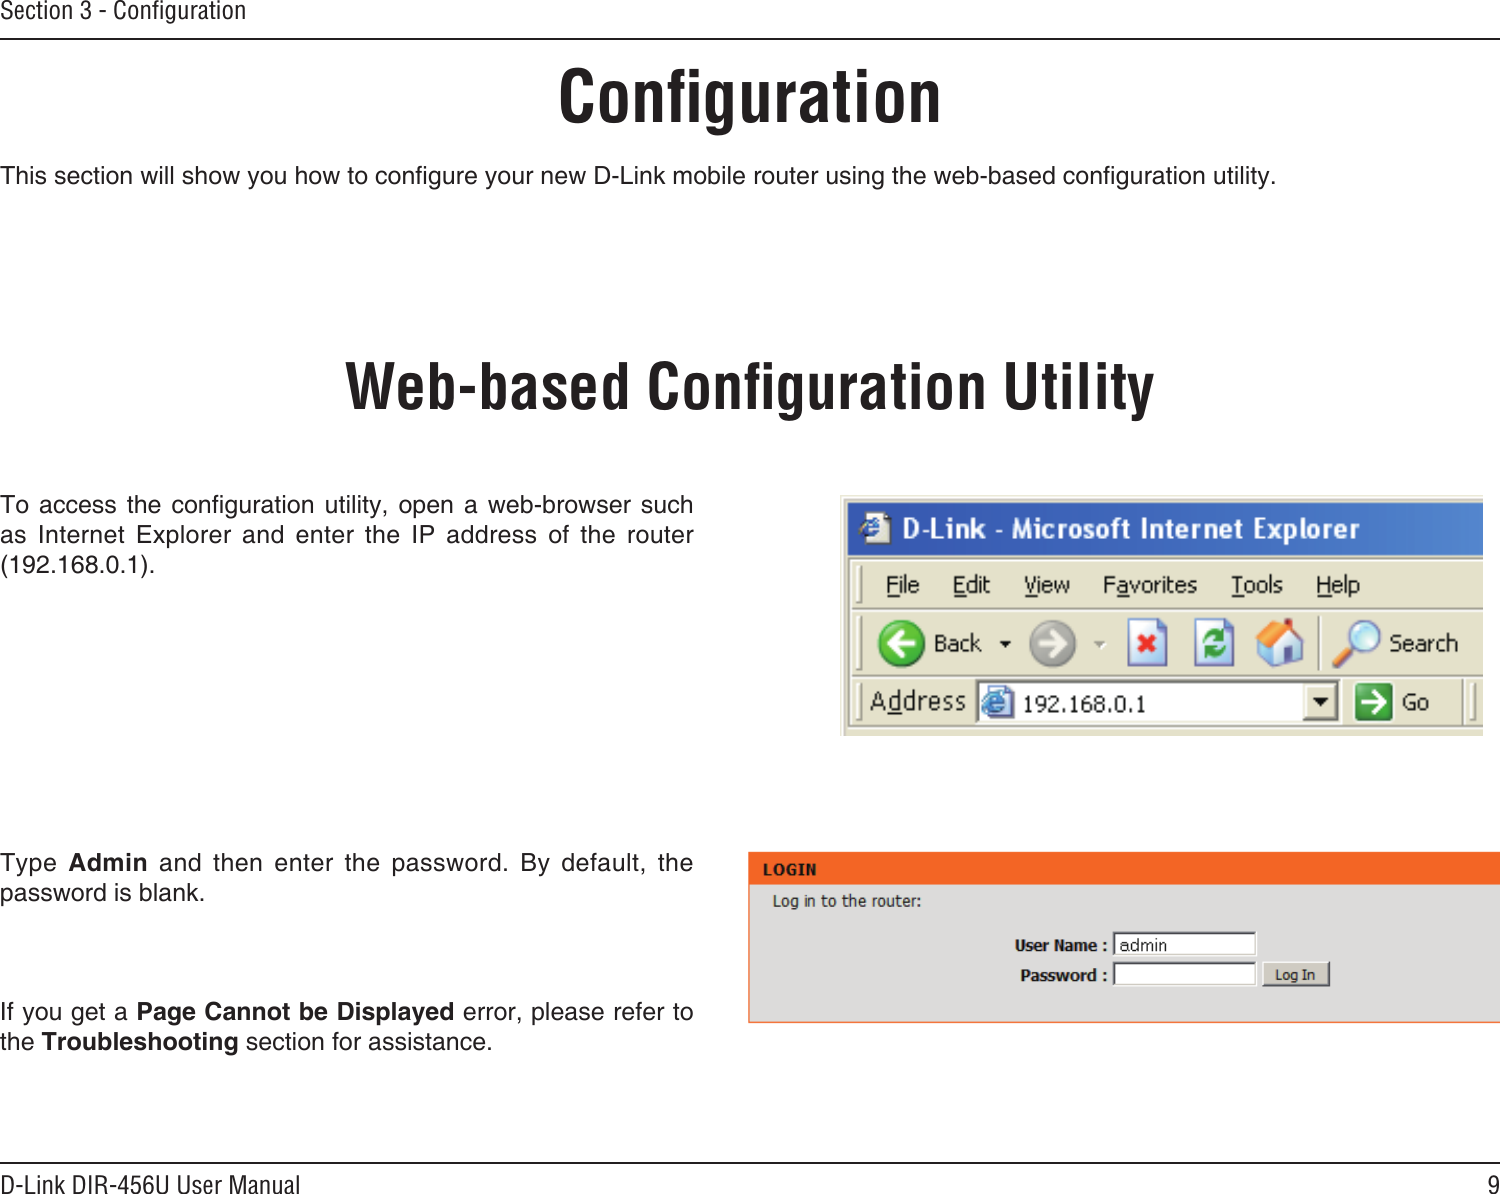 9D-Link DIR-456U User ManualSection 3 - ConﬁgurationConﬁgurationThis section will show you how to congure your new D-Link mobile router using the web-based conguration utility.Web-based Conﬁguration UtilityTo access  the conguration  utility, open  a web-browser  such as  Internet  Explorer  and  enter  the  IP  address  of  the  router (192.168.0.1).Type  Admin  and  then  enter  the  password.  By  default,  the password is blank.If you get a Page Cannot be Displayed error, please refer to the Troubleshooting section for assistance.